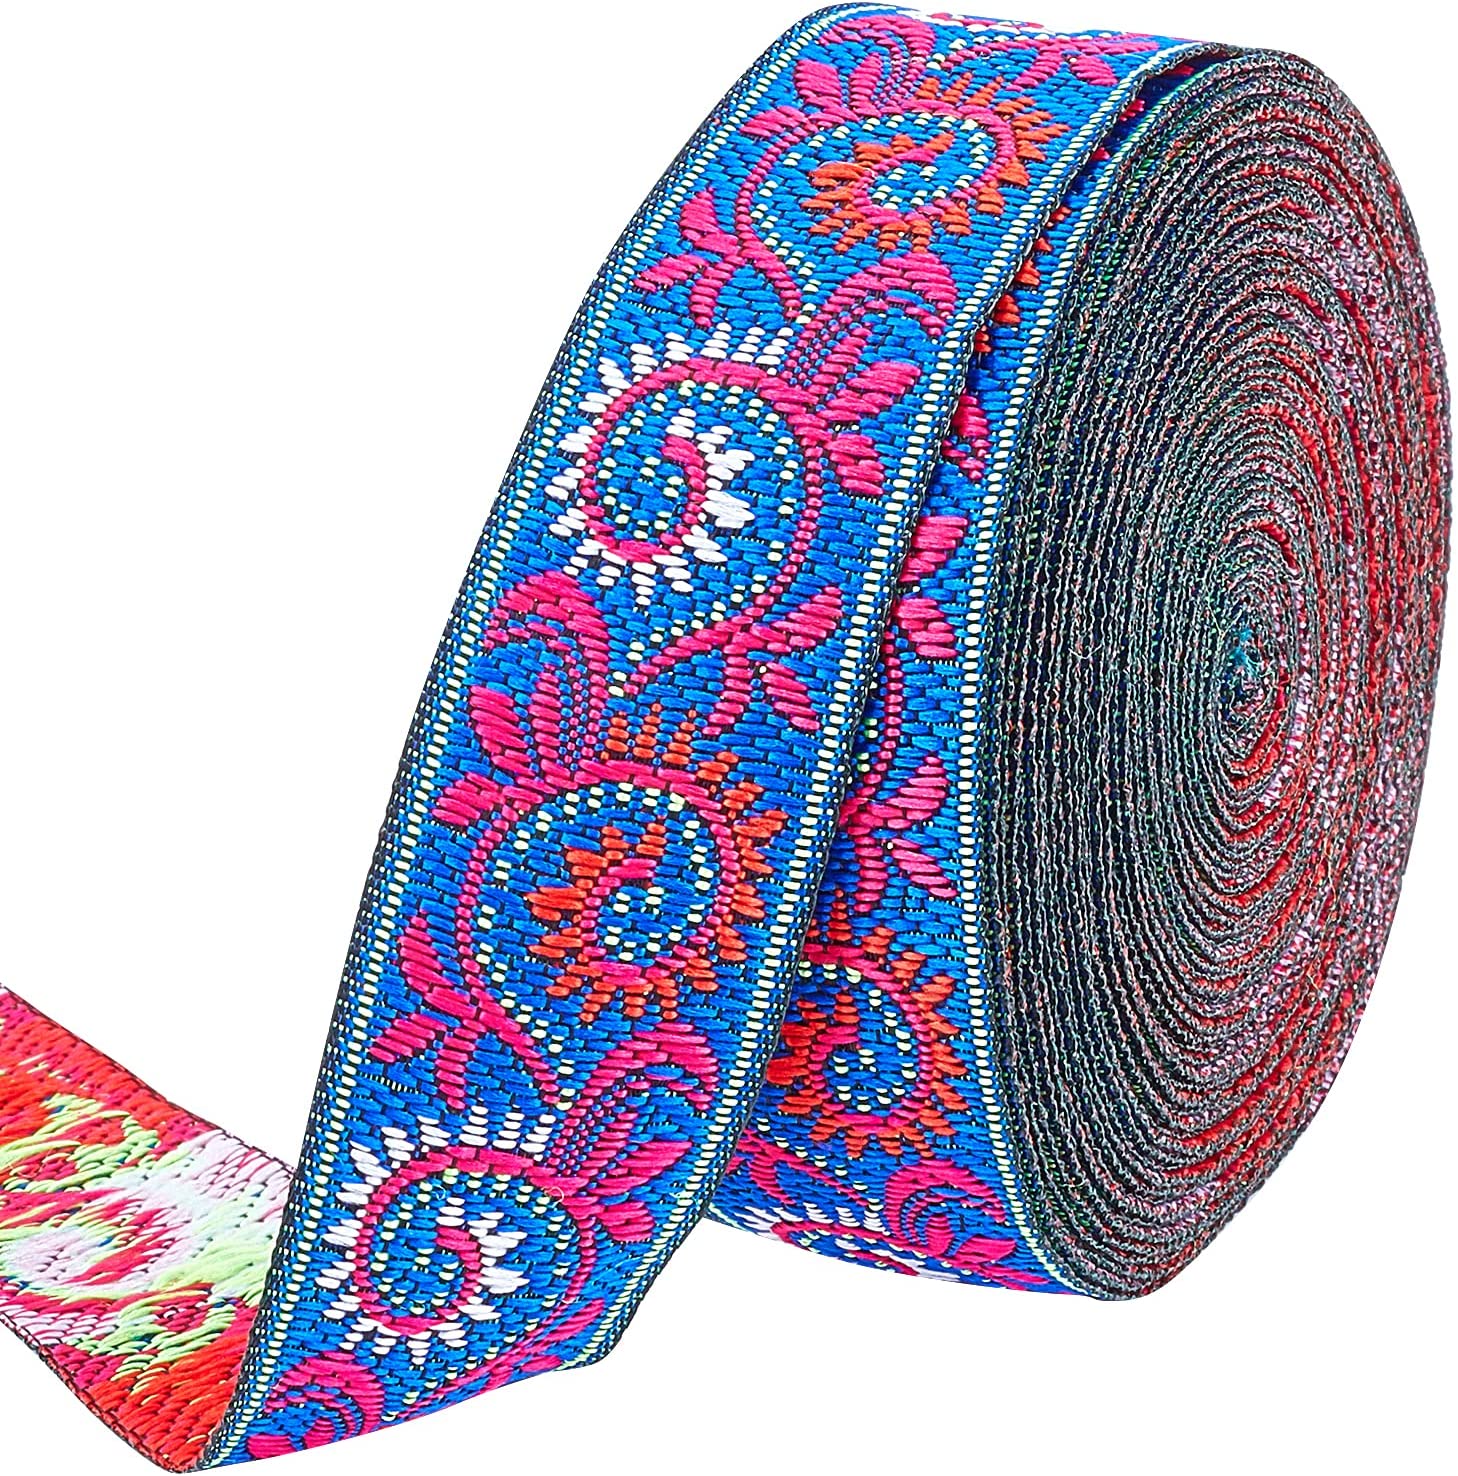 7 Yards Jacquard Ribbon Vintage Woven Trim 2 Inch Floral Woven Embroidered  Ribbon Fabric DIY for Embellishment Craft Supplies Clothes Strap Sewing  Decor Trim 